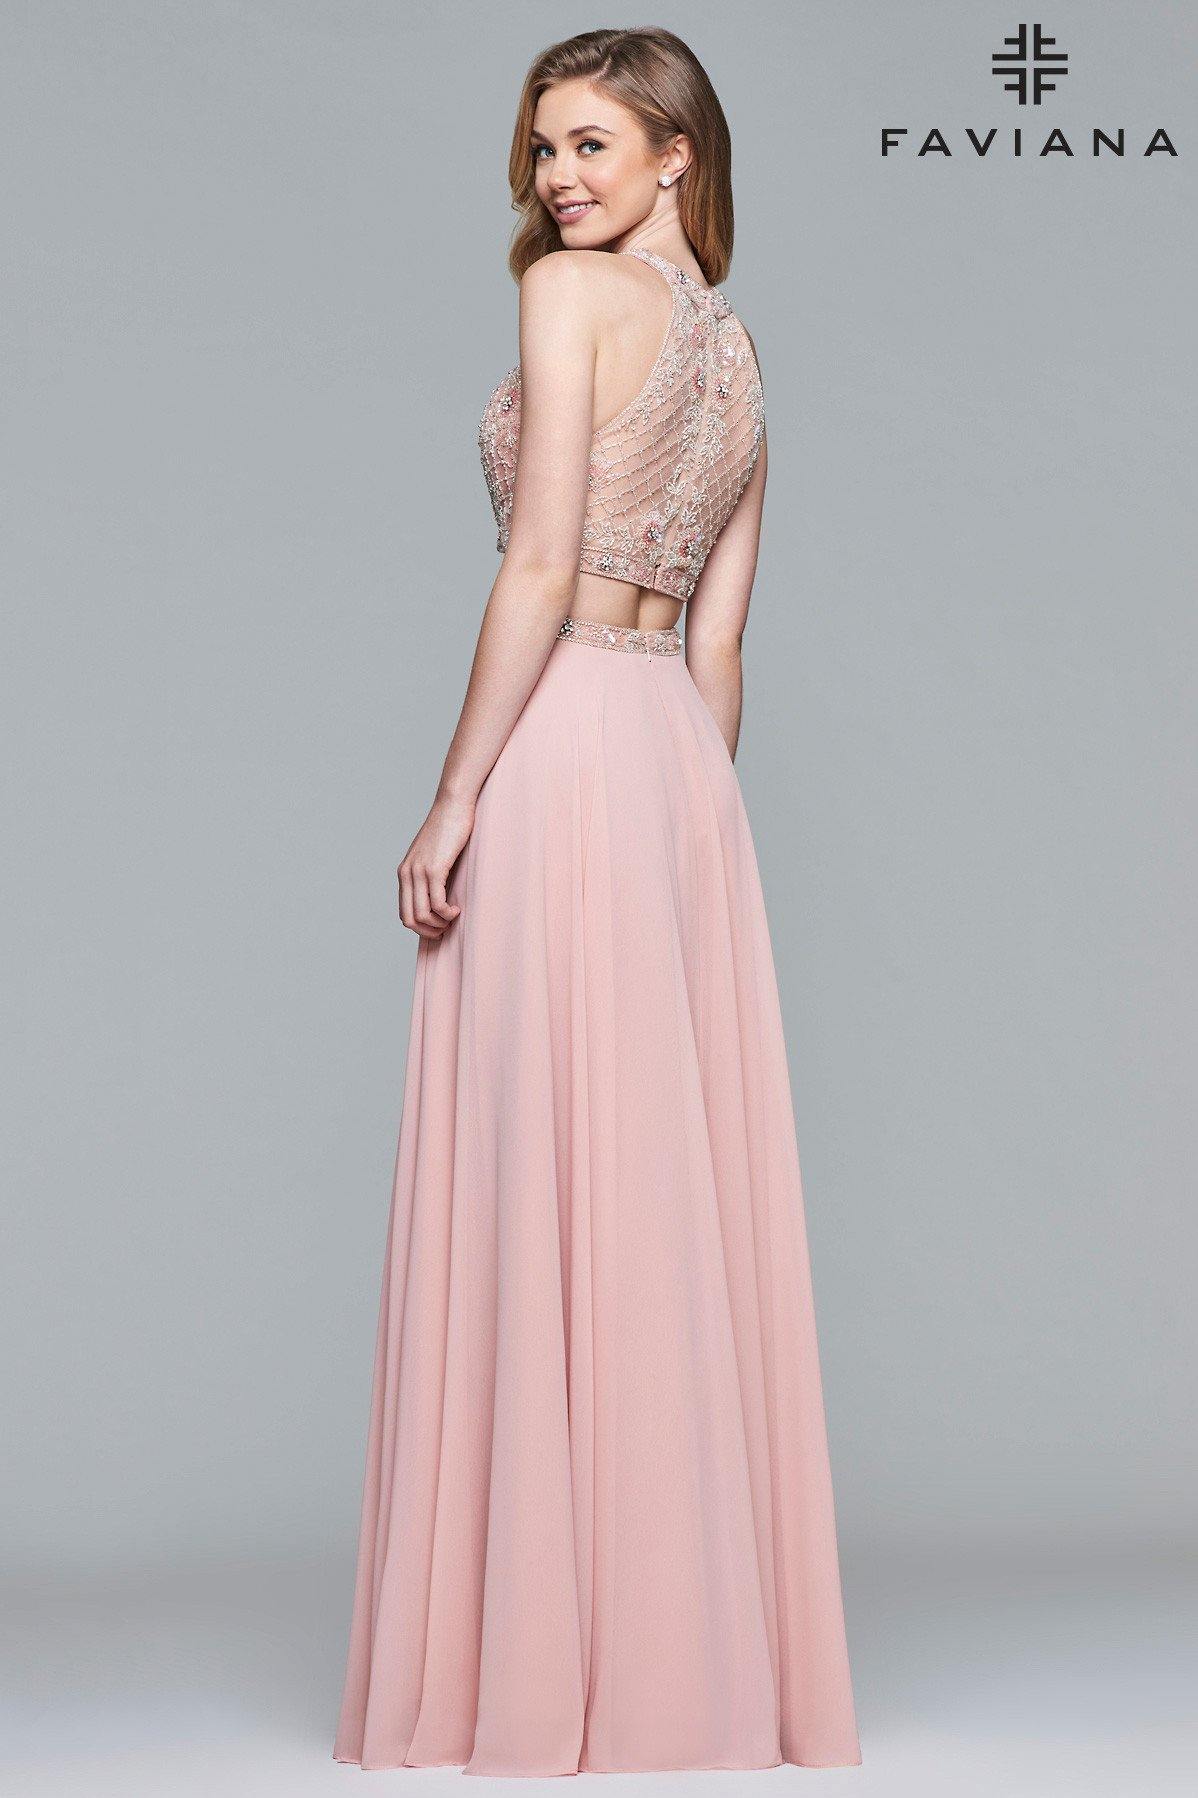 Faviana Sexy Two Piece Prom Dress 10059 Sale - The Dress Outlet